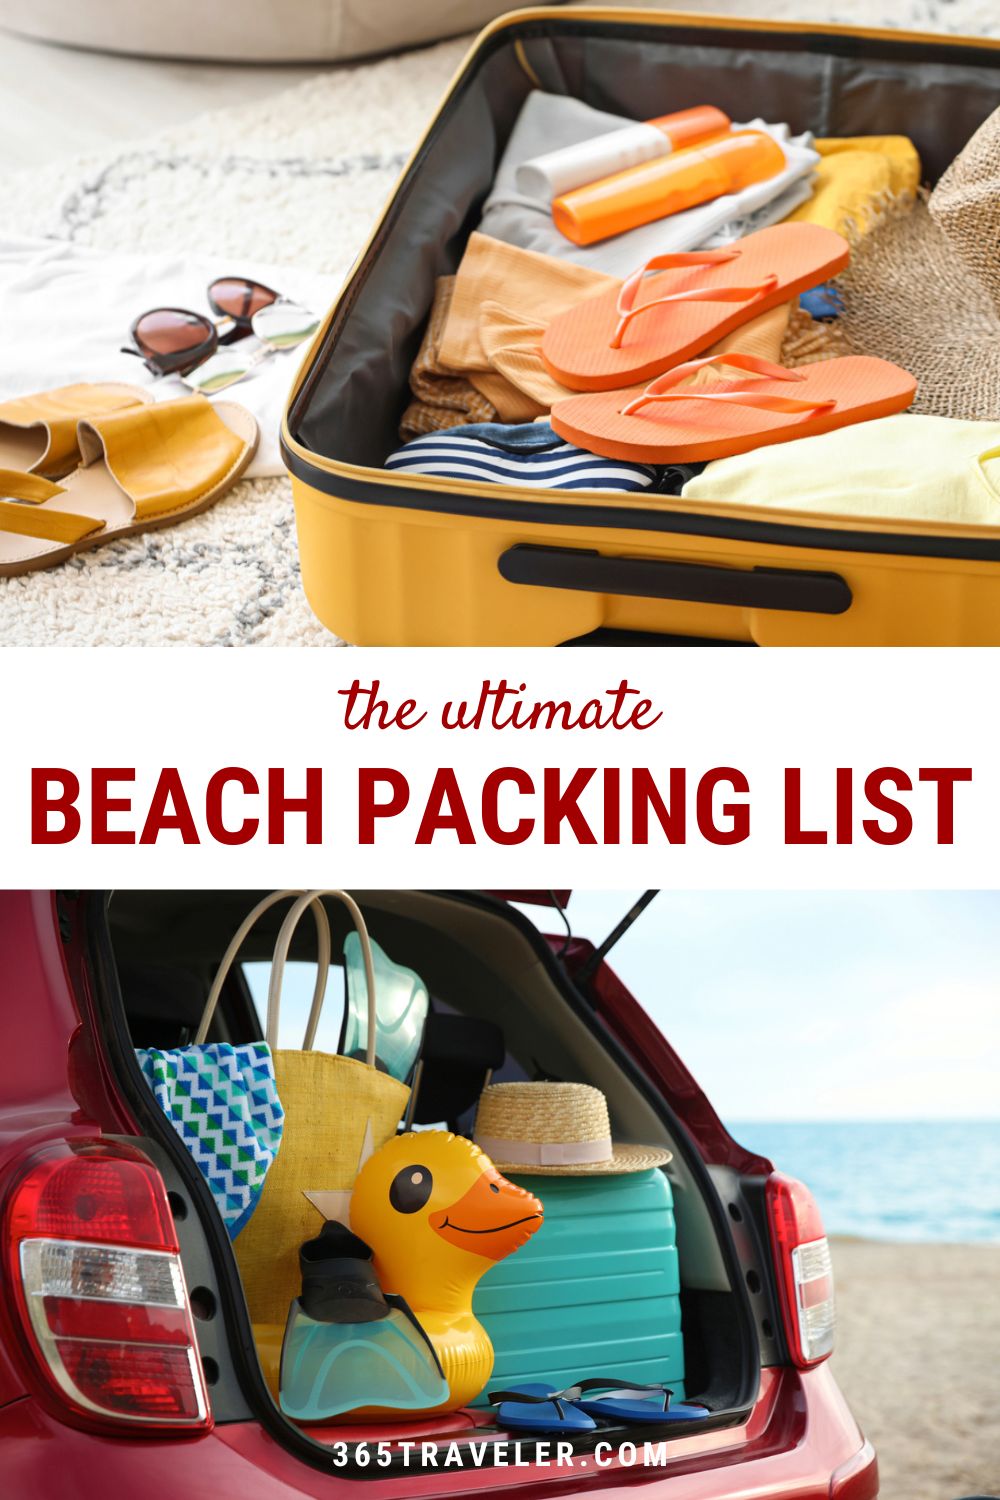 THE ULTIMATE BEACH PACKING LIST FOR YOUR NEXT VACATION